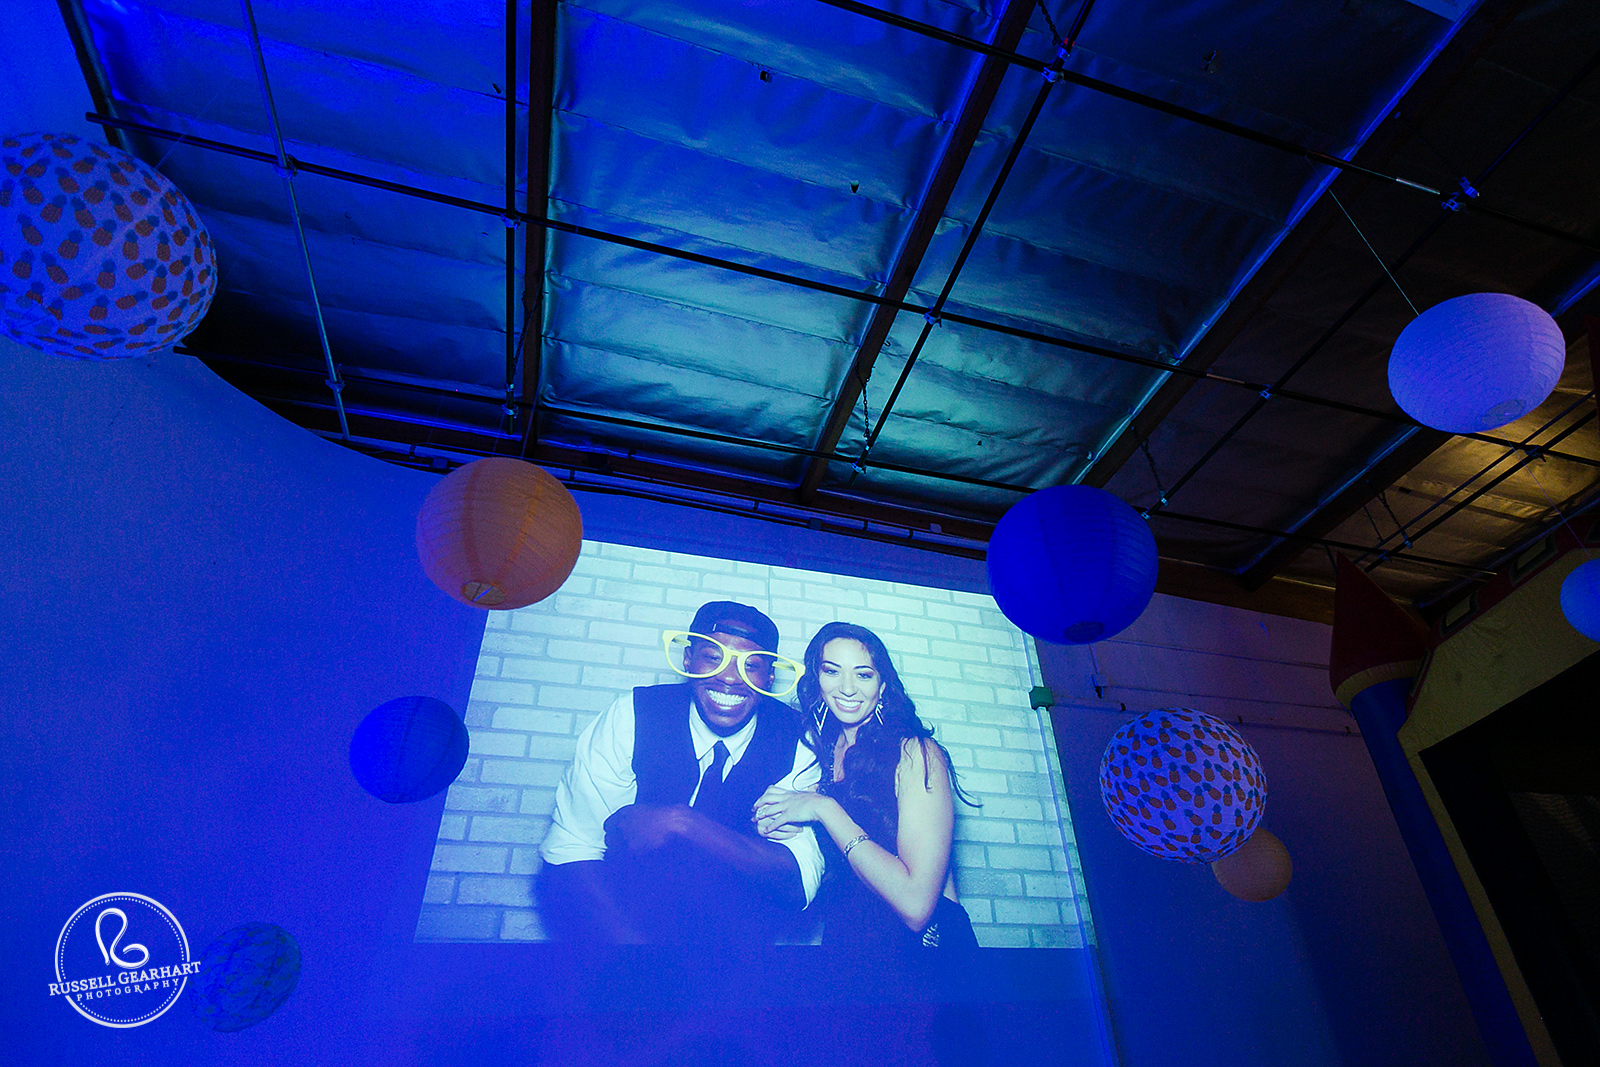 Photobooth Images Projected Instantly – Pasadena Wedding Photobooth – Russell Gearhart Photography – www.gearhartphoto.com